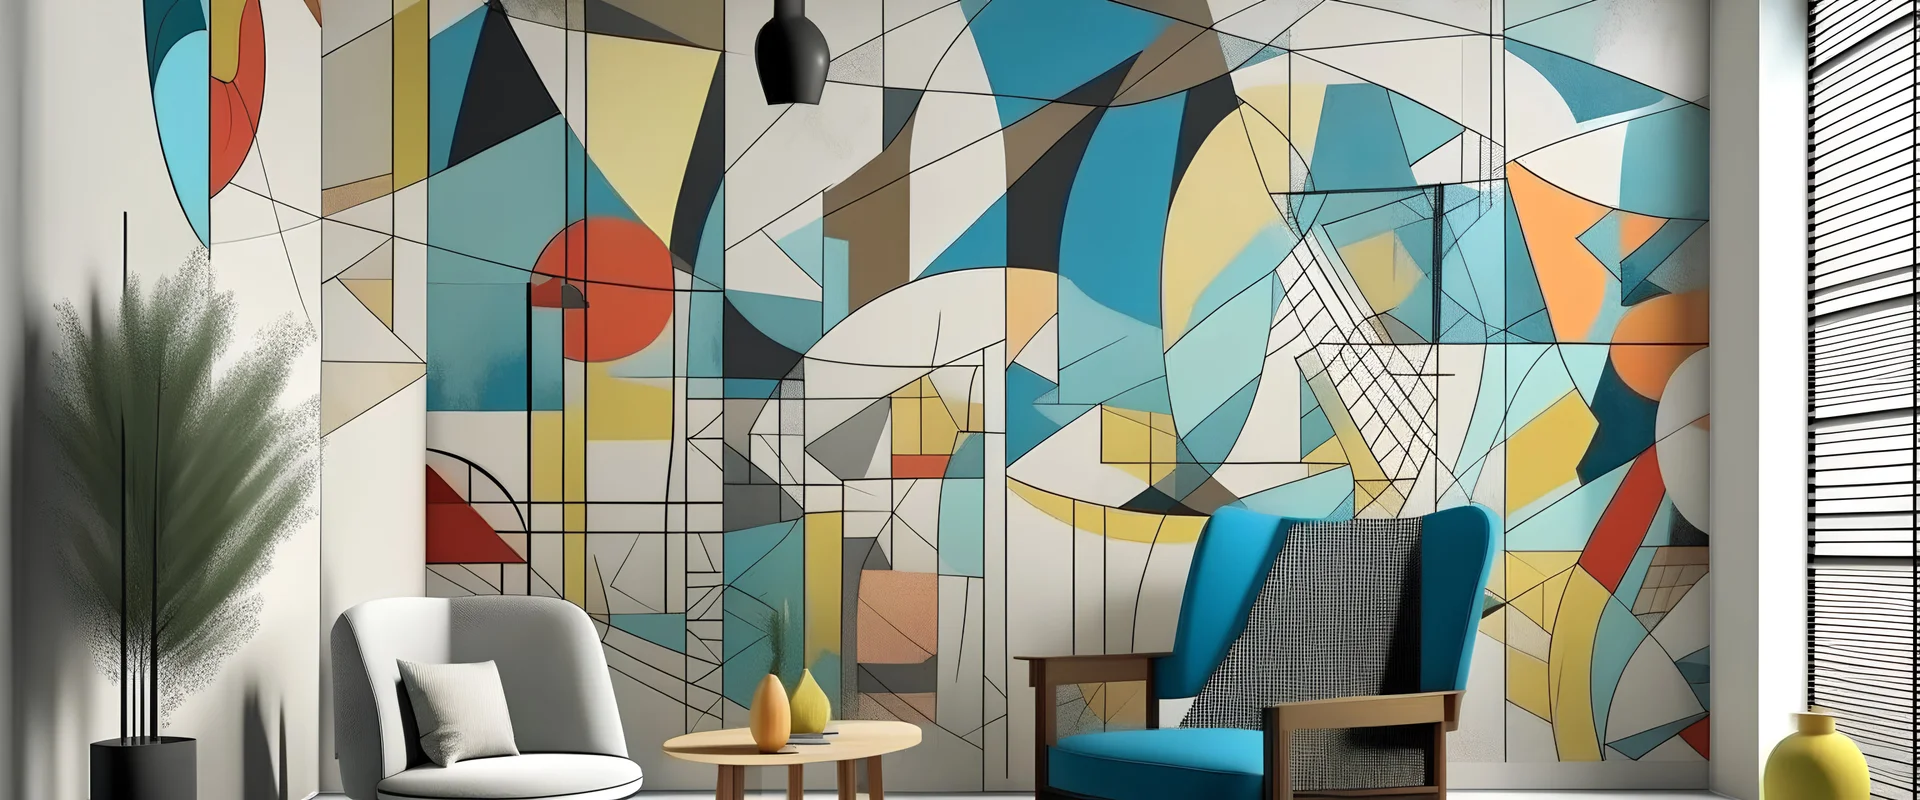 : Design a mural that acts as a symphony of shapes, seamlessly blending abstract, geometric, organic, and inorganic elements in a harmonious composition.